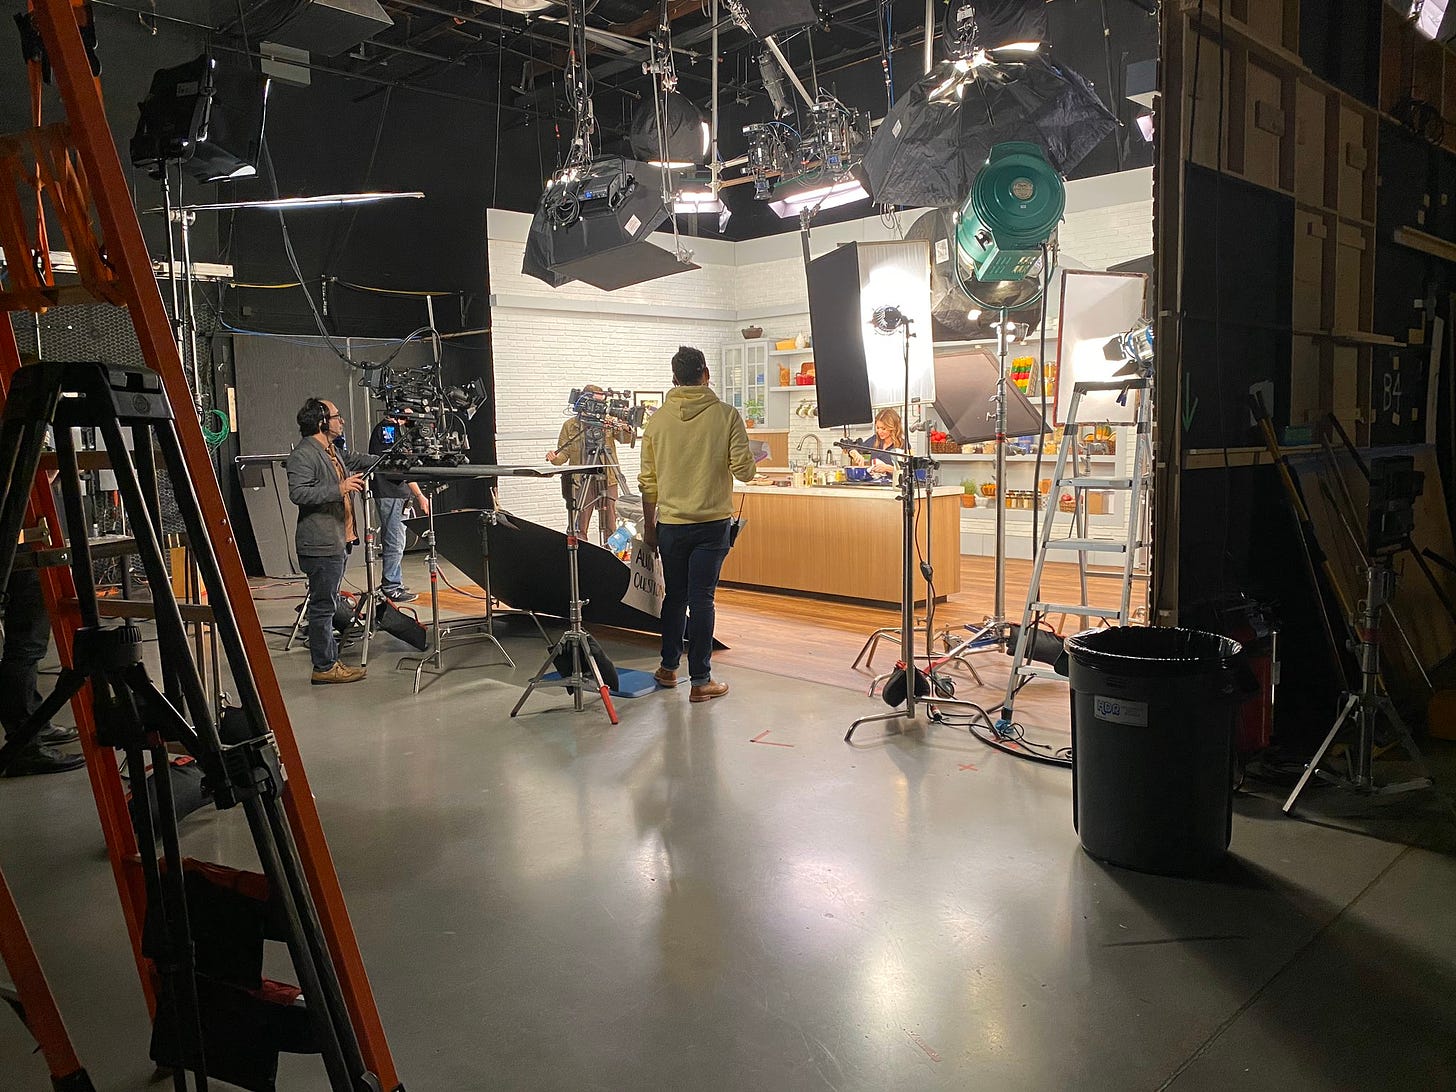 Christy Vega on Twitter: "Behind the scenes tonight at the Food Network  Kitchens! Check out the app for cooking tips, recipes, and shows!  #livecookingdemos @FoodNetwork https://t.co/oqIvyDVlSy" / Twitter